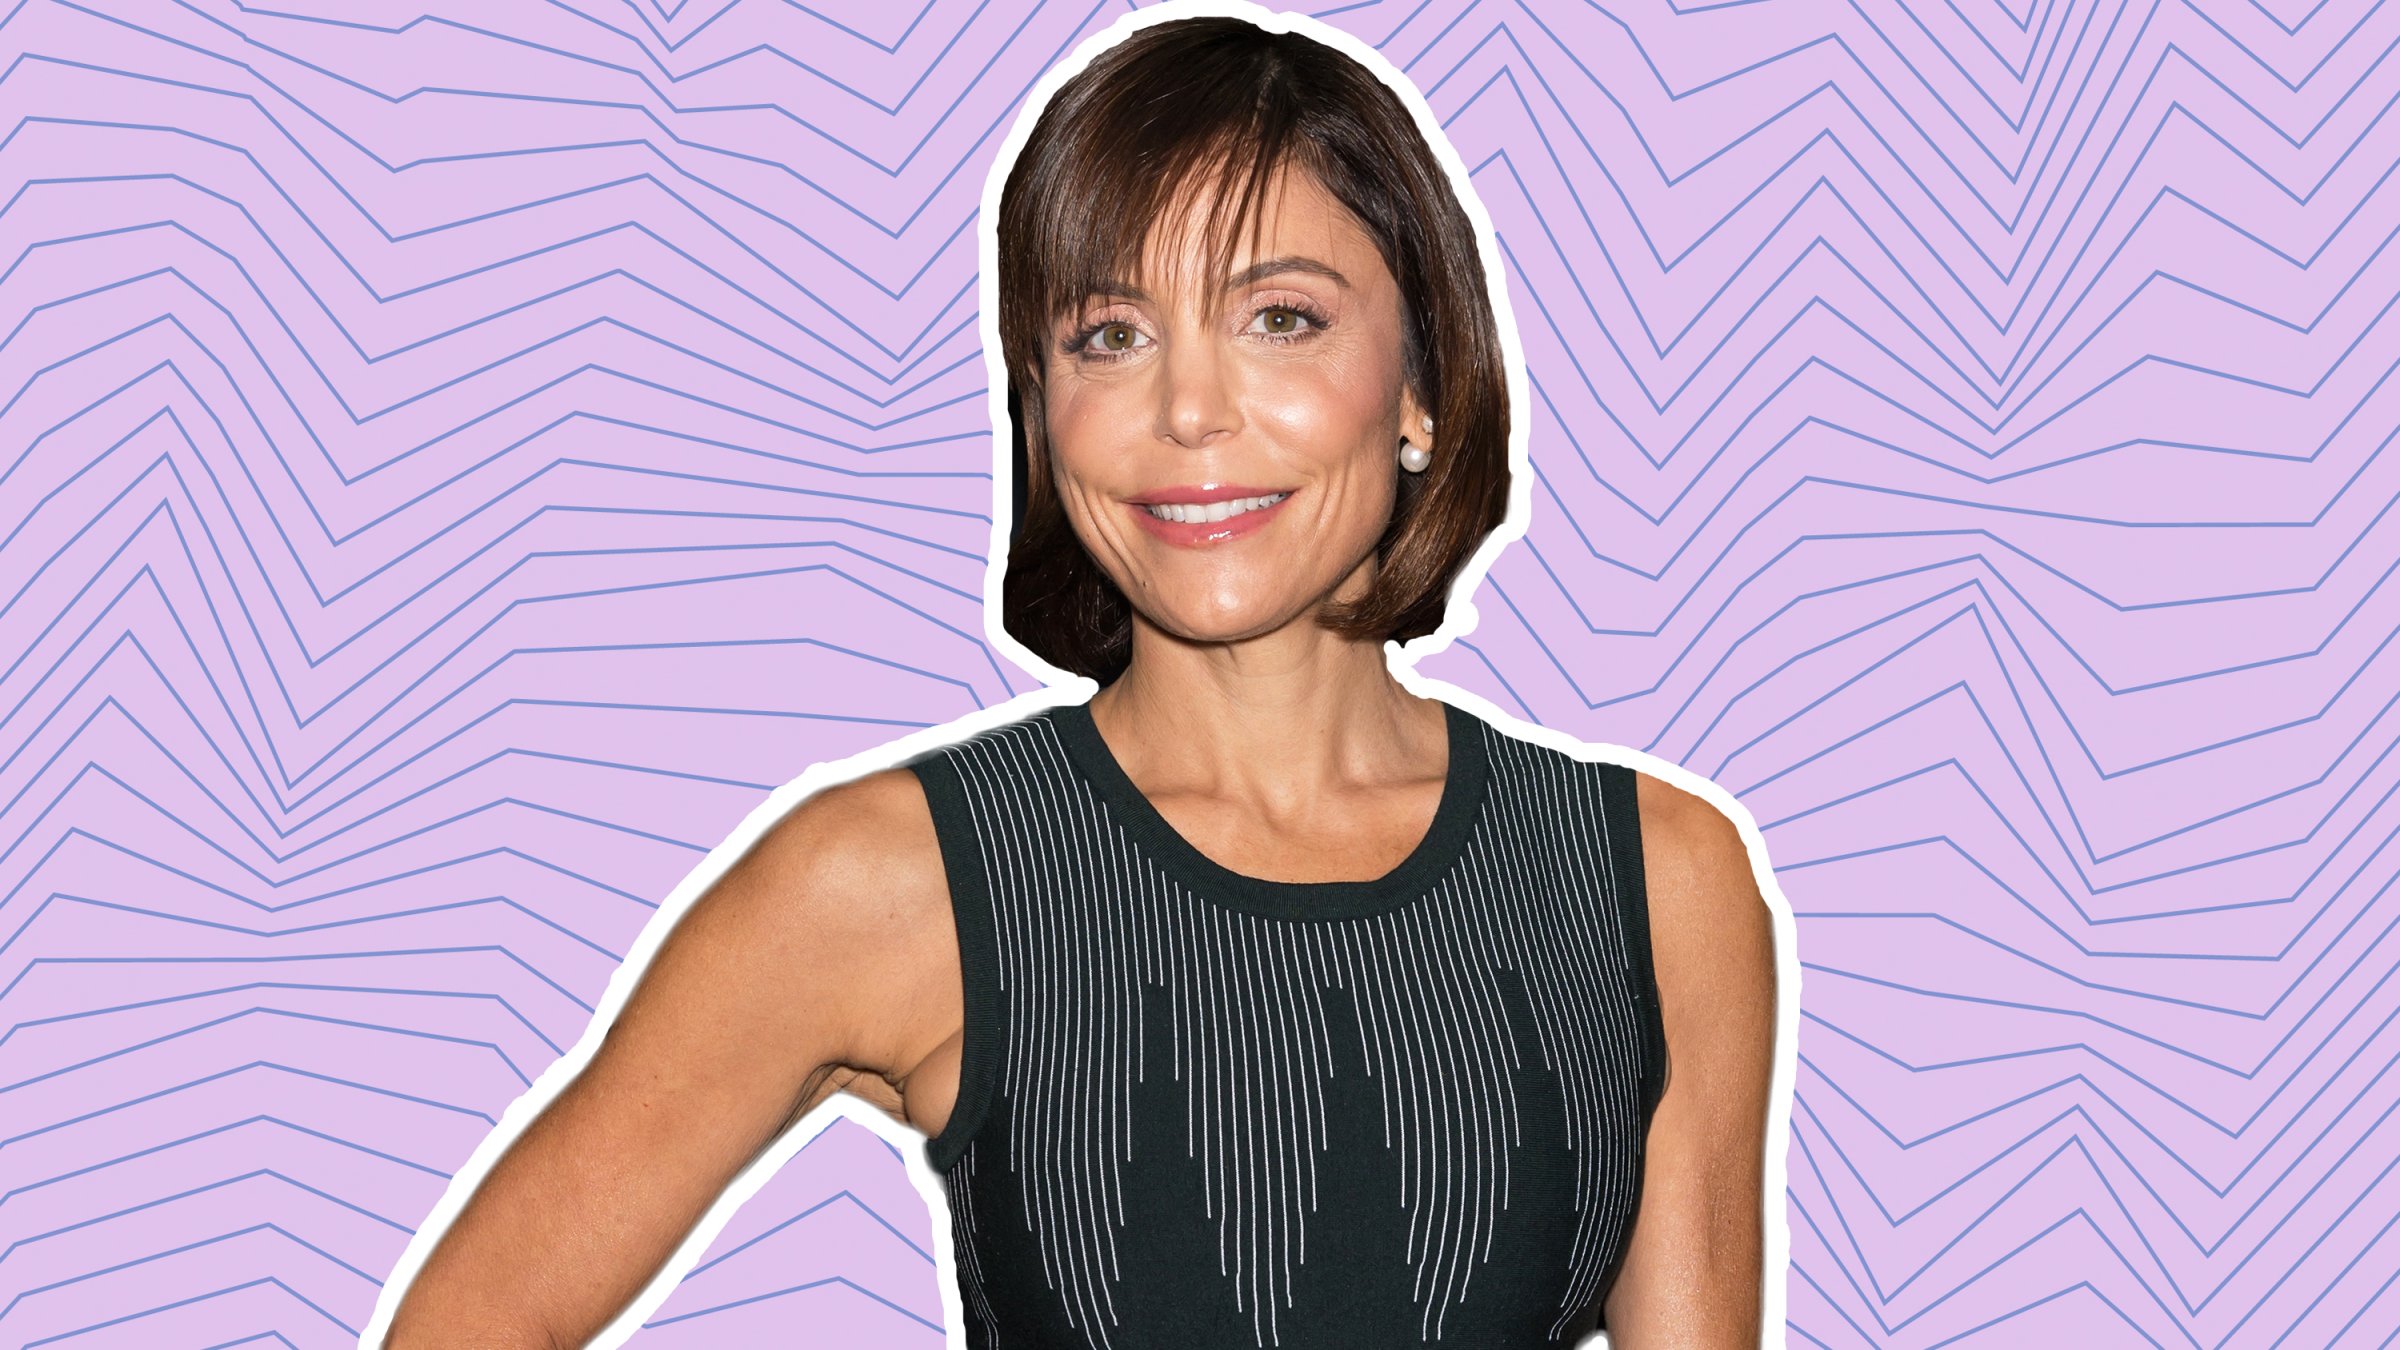 Reality TV personality, author, chef and founder of Skinnygirl Cocktails, Bethenny Frankel attends the 2016 Evening Of Giving, benefitting Abramson Cancer Center at King of Prussia Mall on September 25, 2016 in King of Prussia, Pennsylvania.